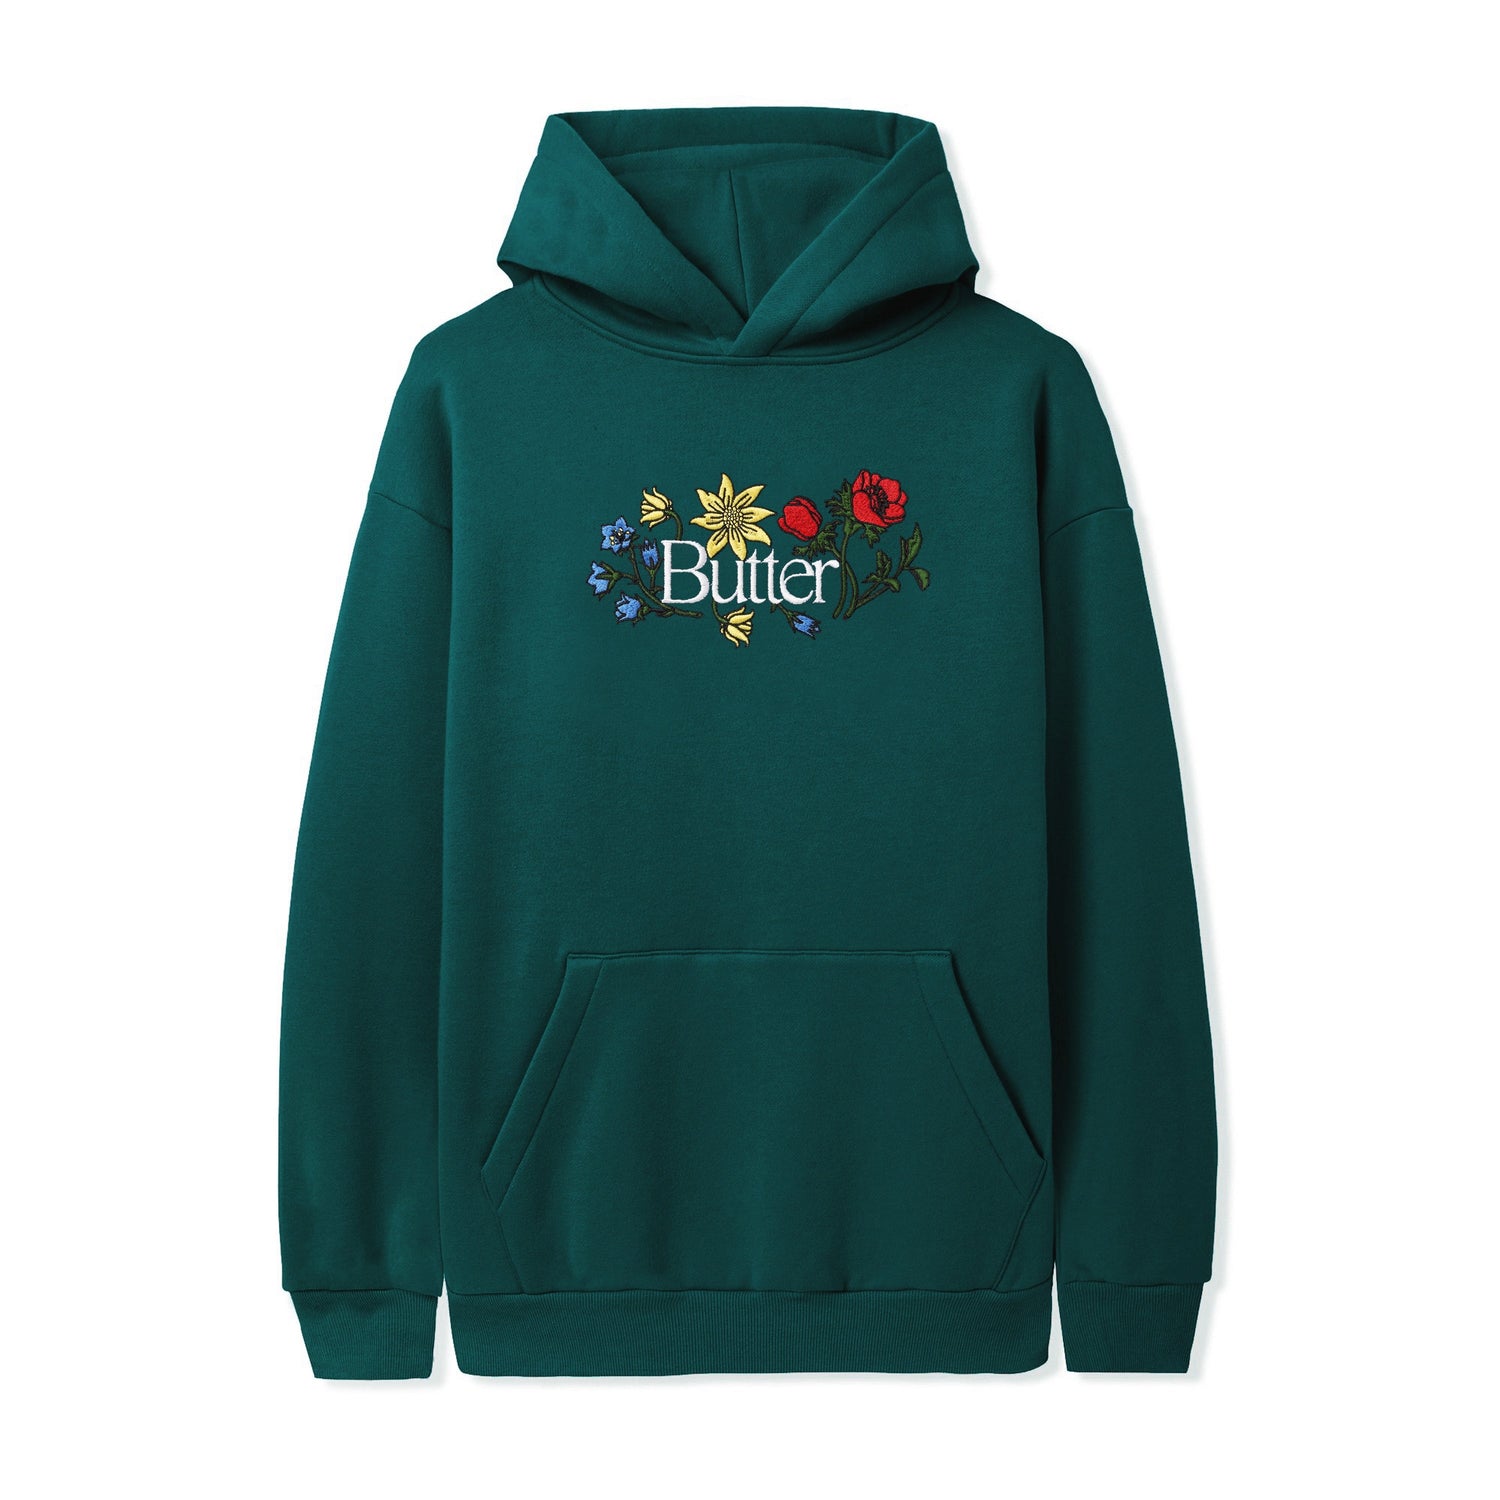 Floral Embroidered Pullover, Dark Green